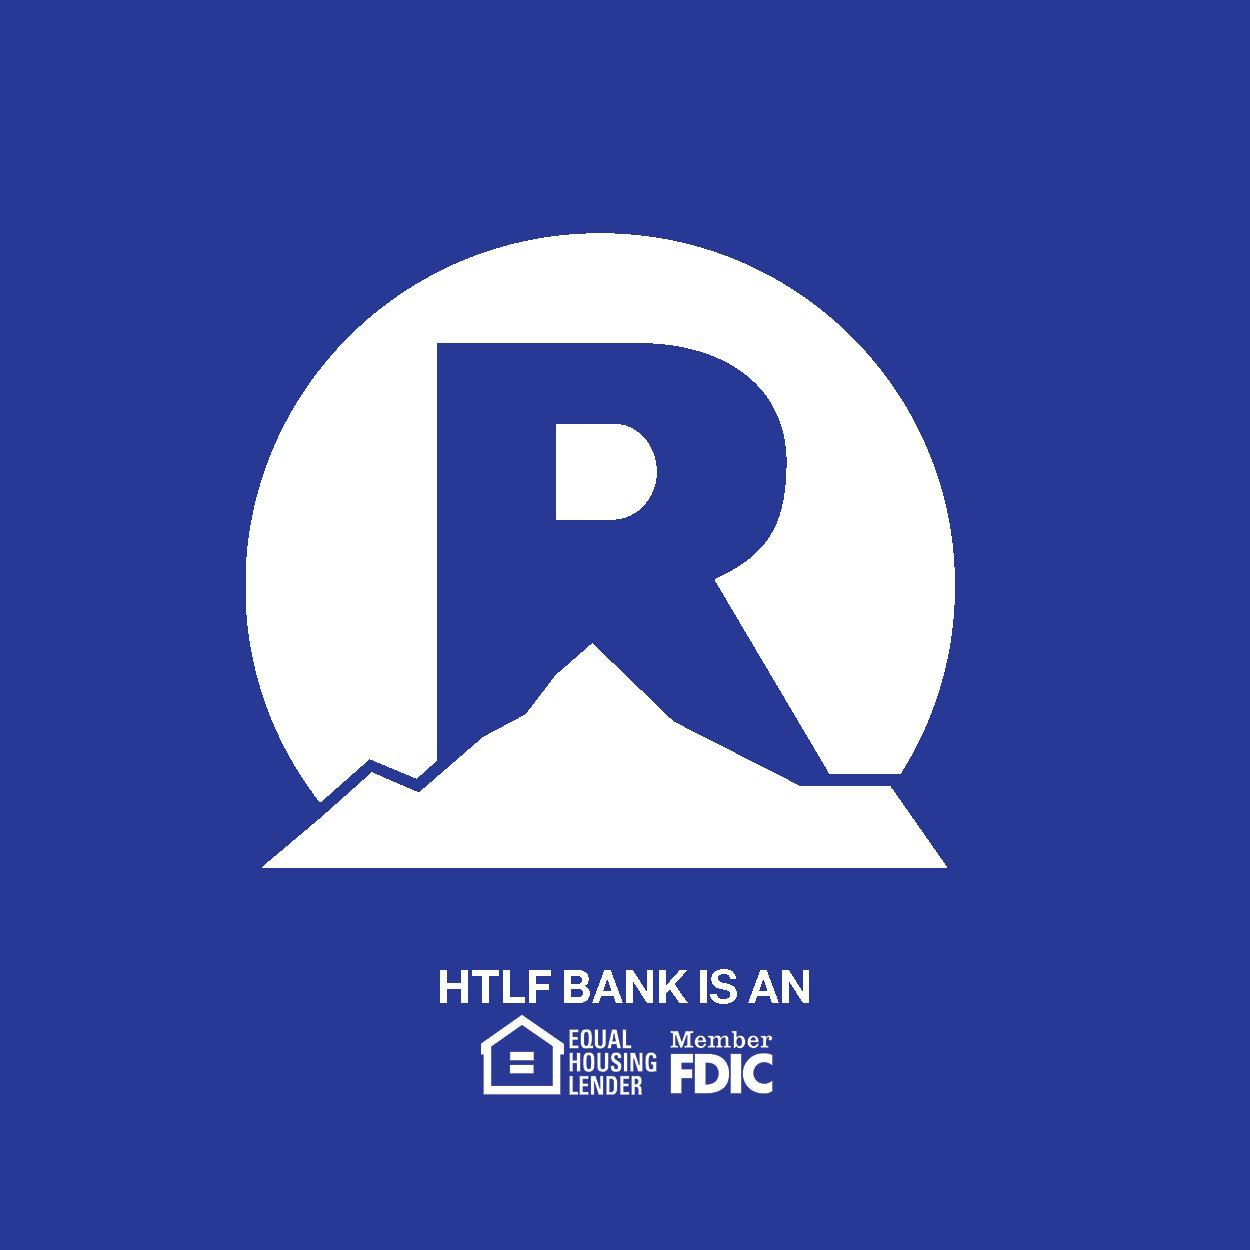 Rocky Mountain Bank, a division of HTLF Bank - Stevensville, MT 59870 - (406)777-5553 | ShowMeLocal.com